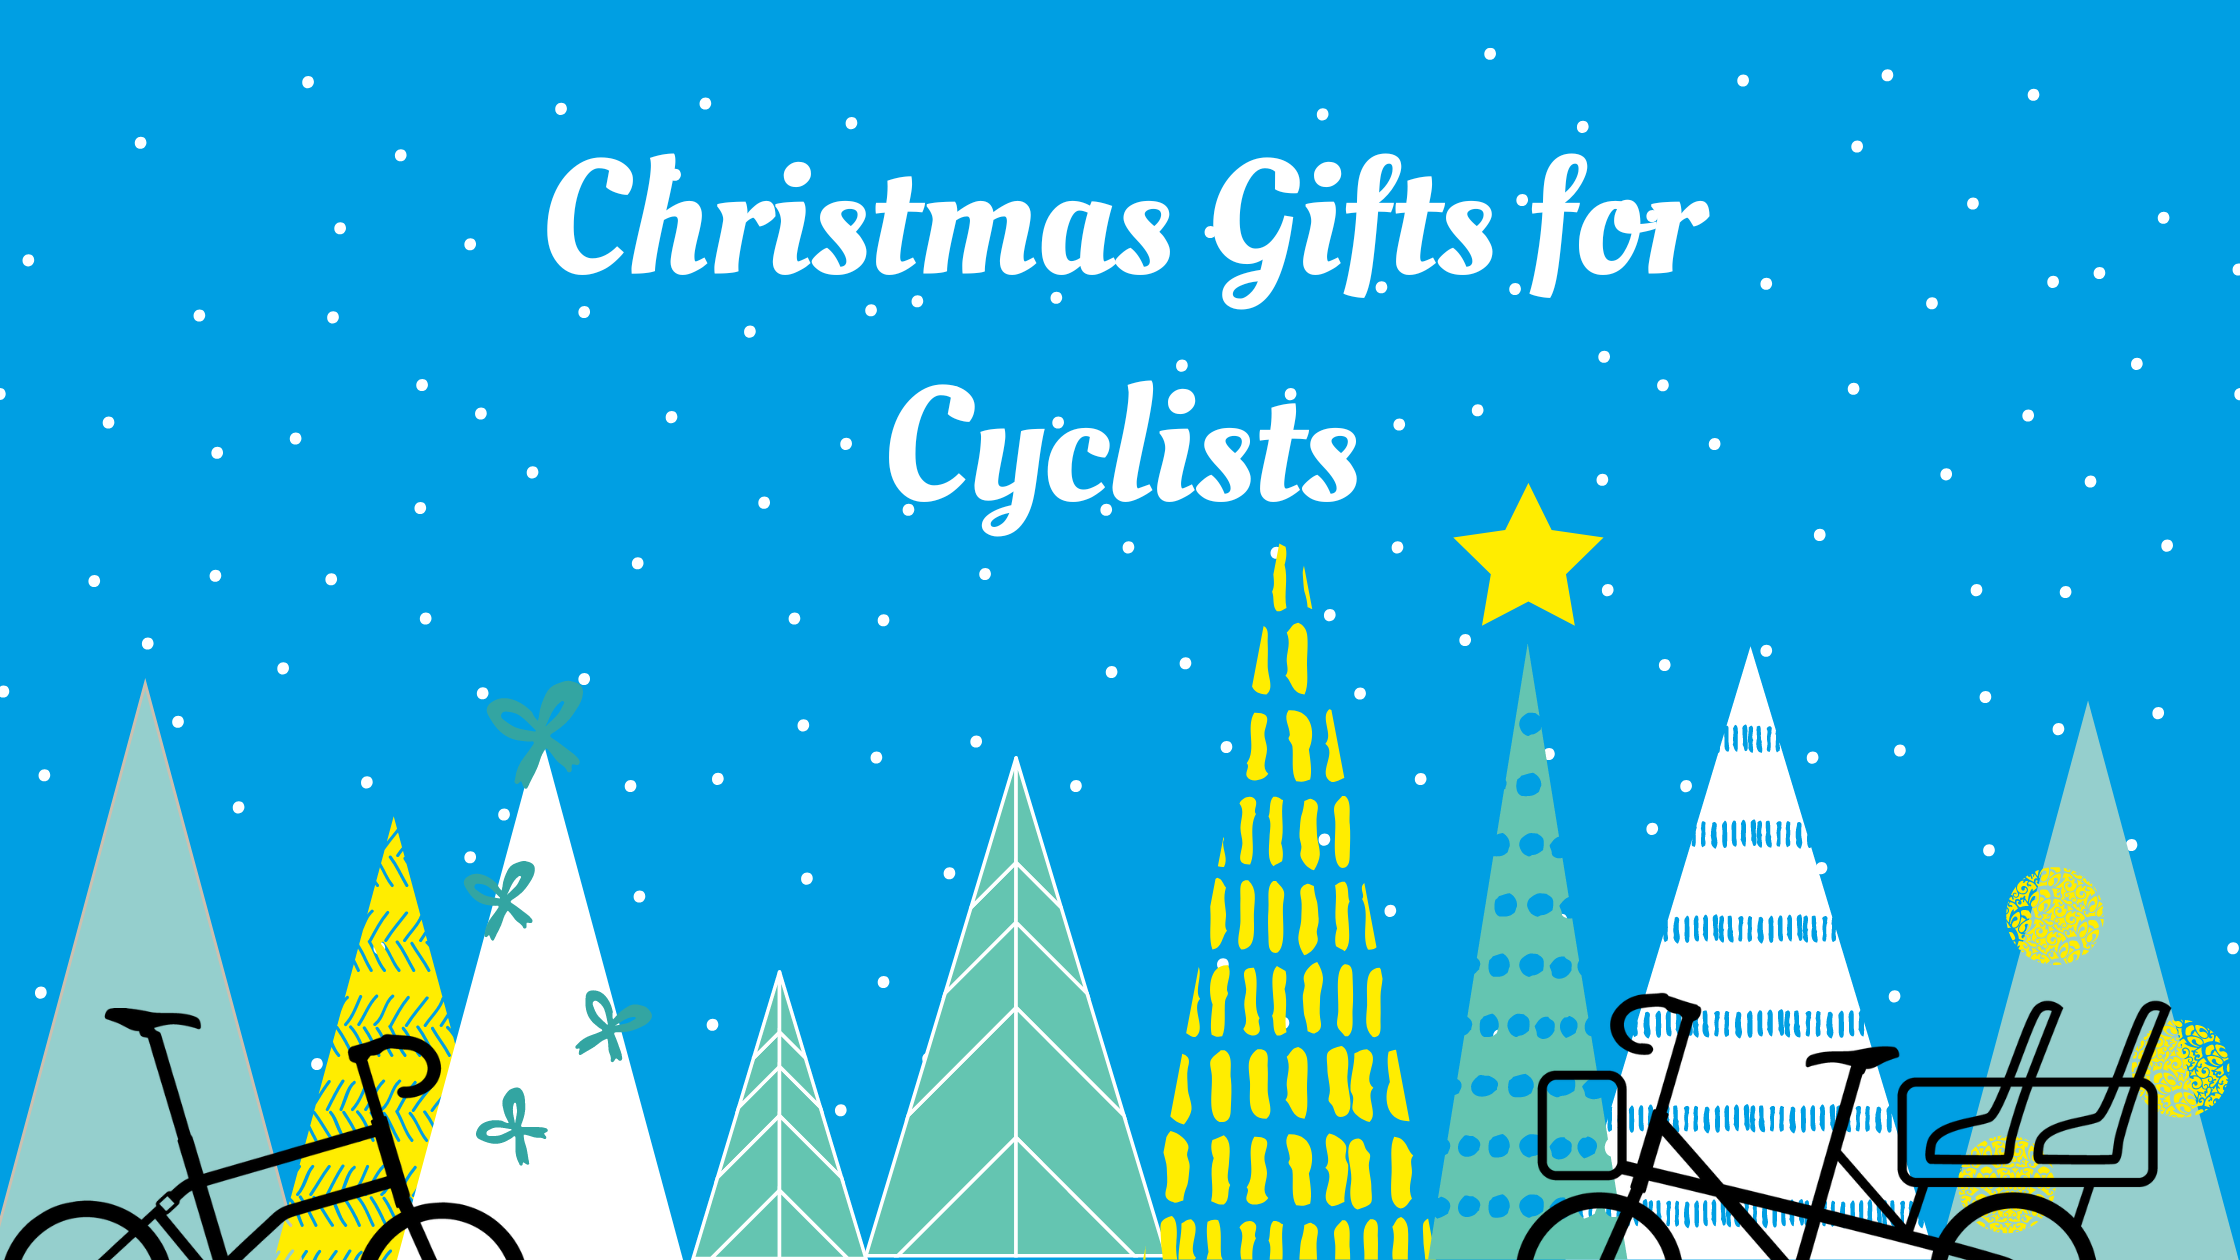 The best Christmas gifts for cyclists in 2022